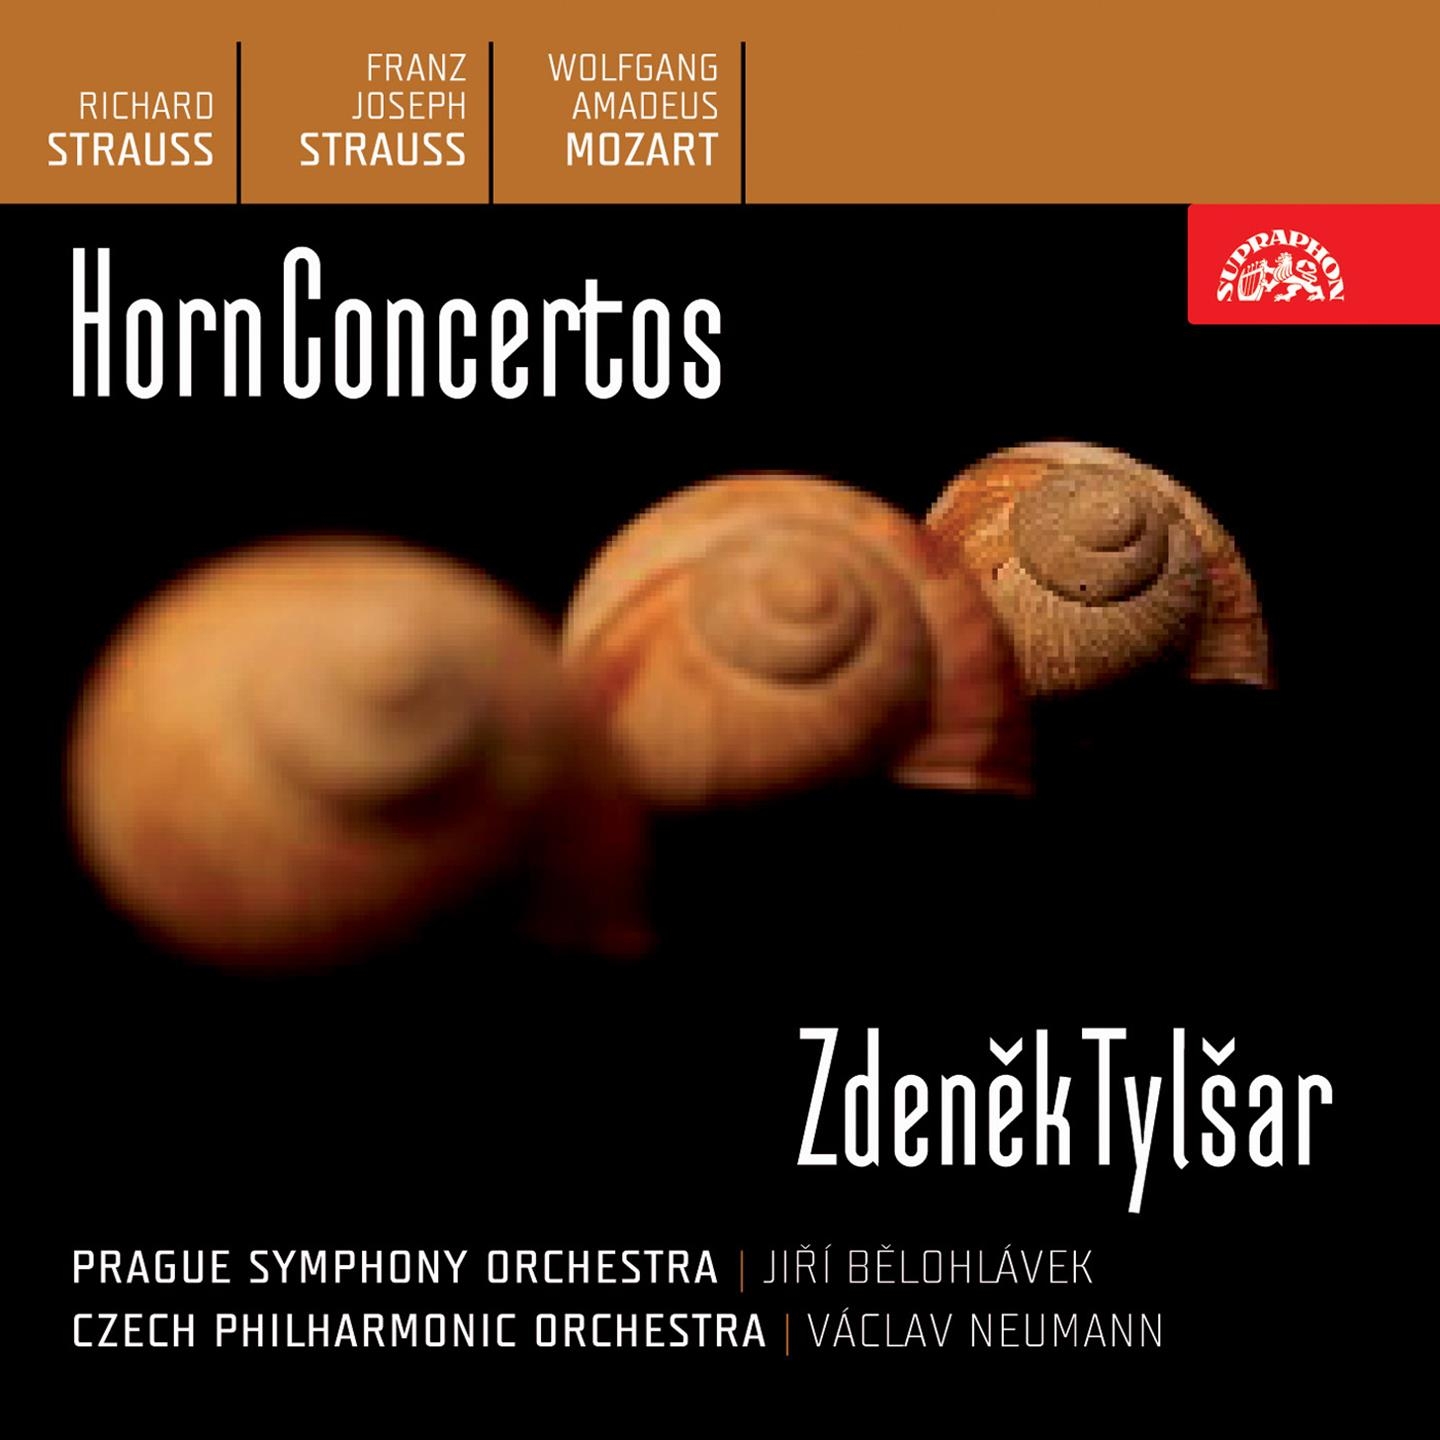 Concerto for French Horn and Orchestra in C-Sharp Minor, Op. 8, .: III. Tempo I.